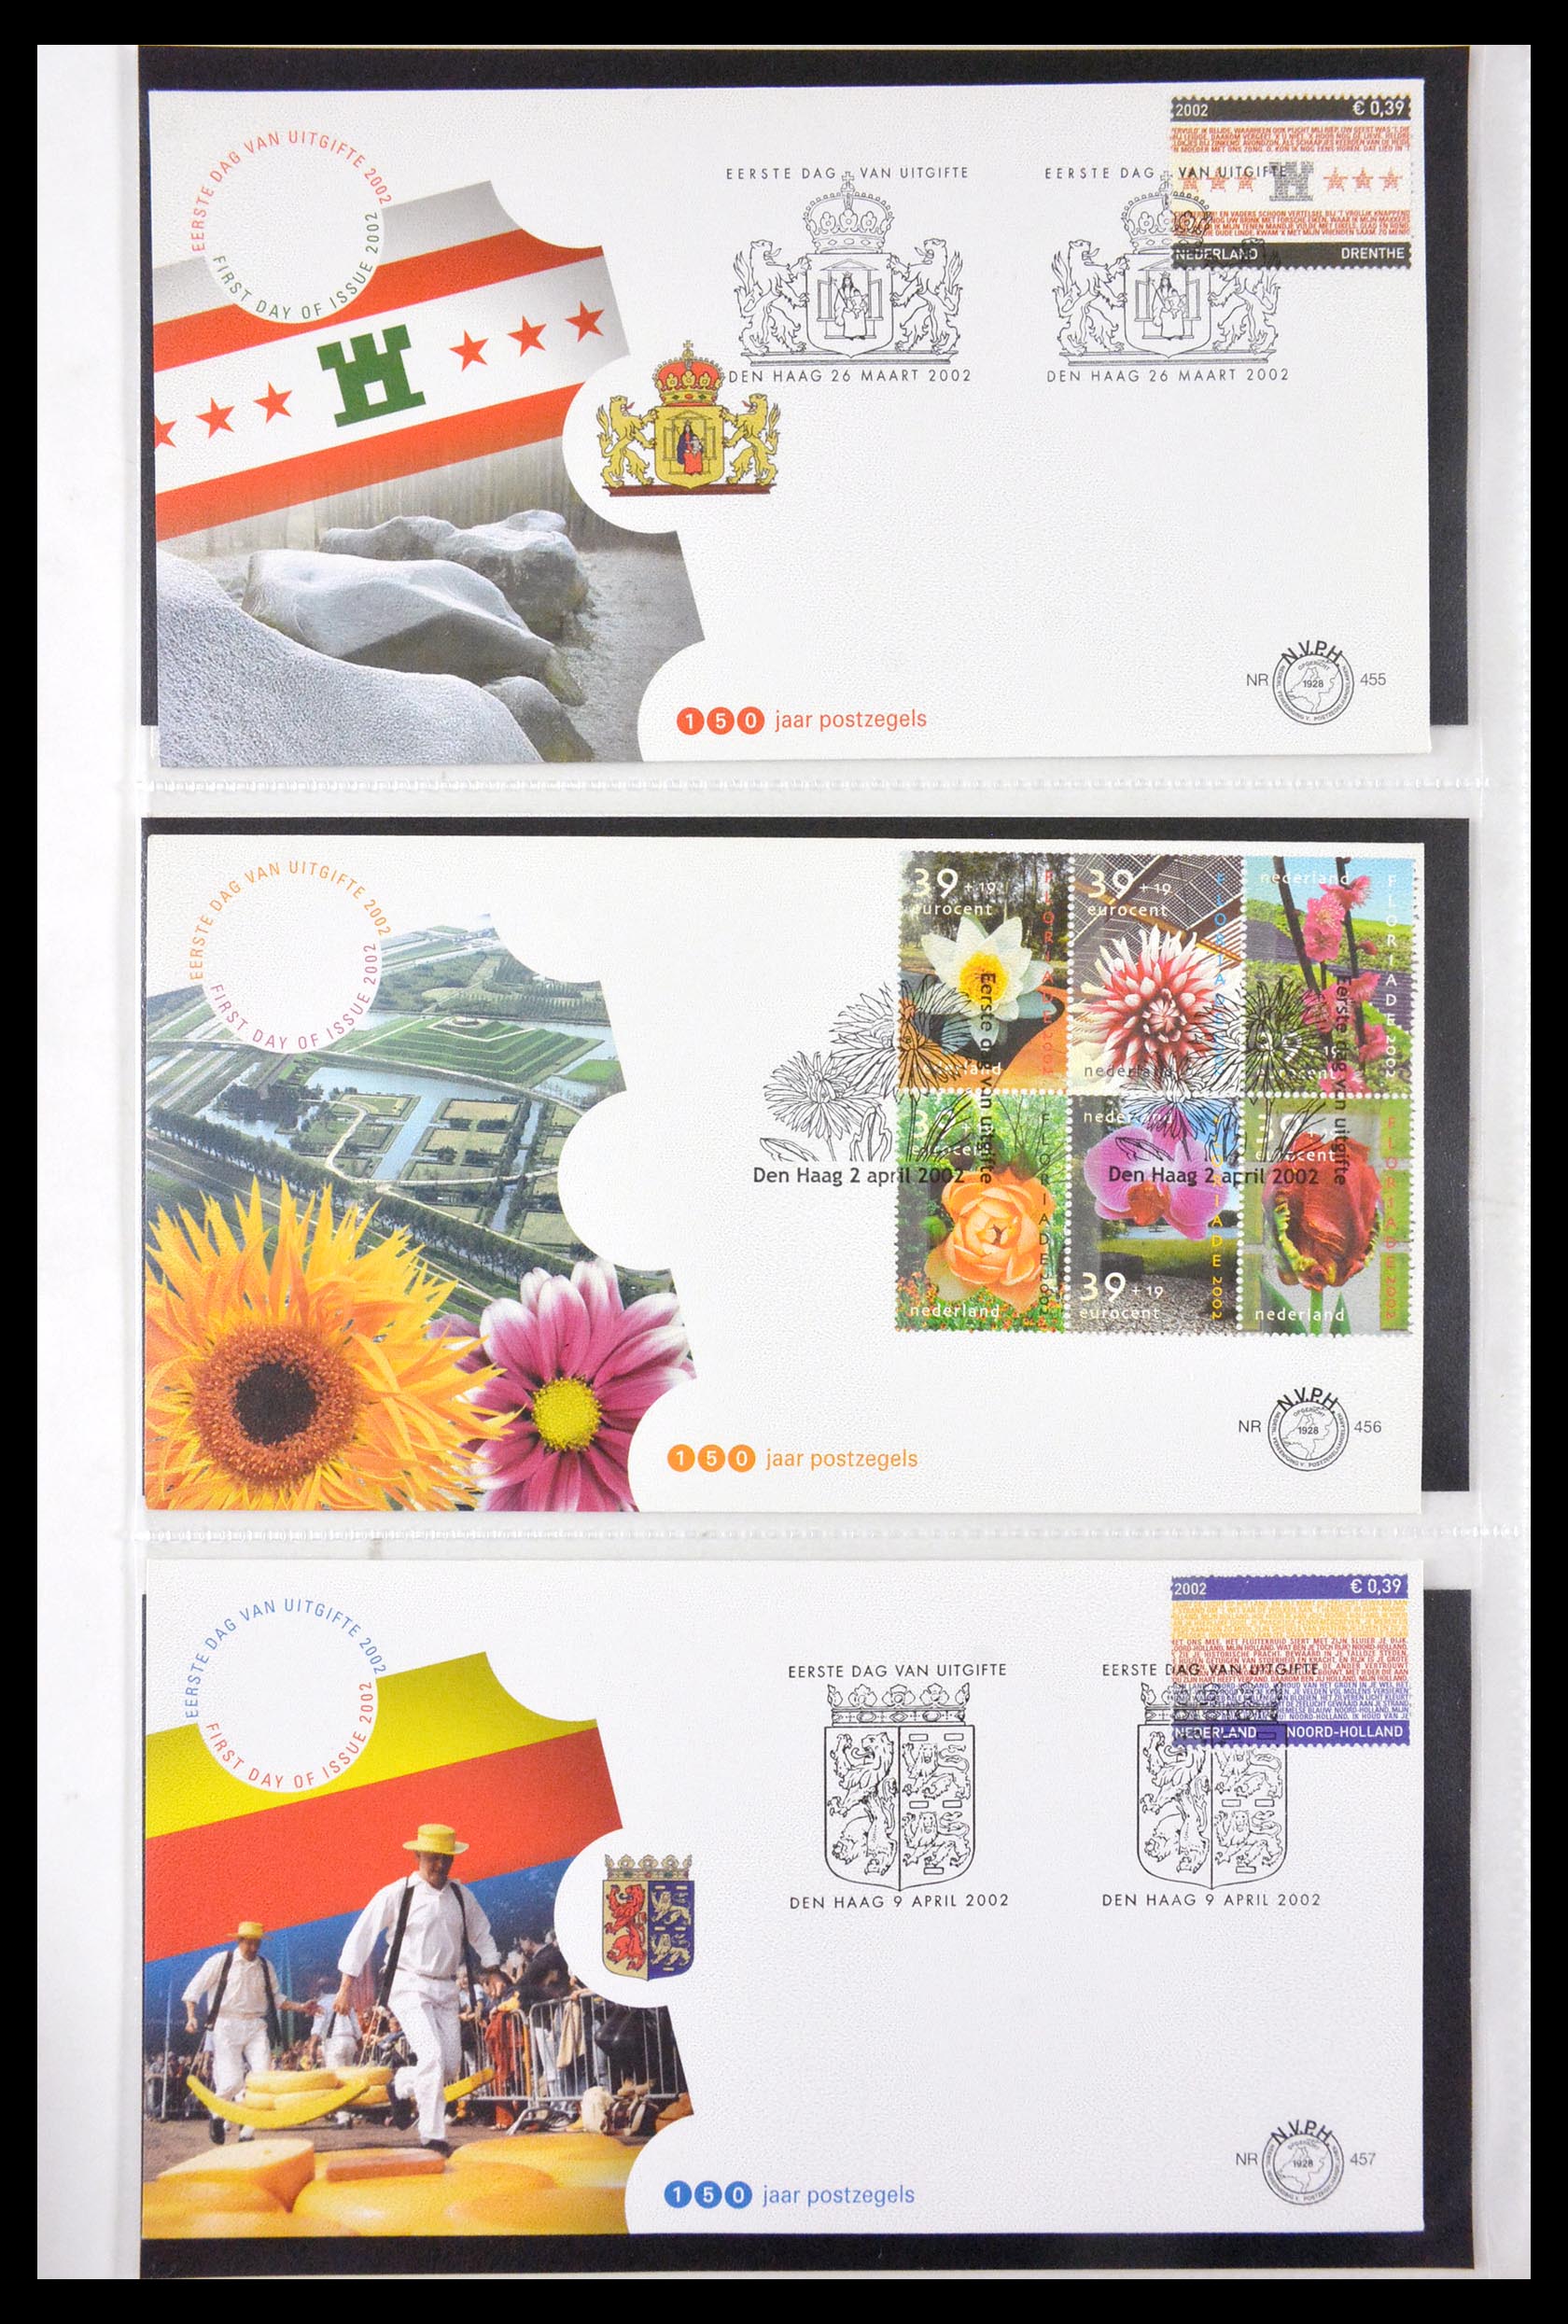 29850 008 - 29850 Netherlands FDC's 2001-2012.